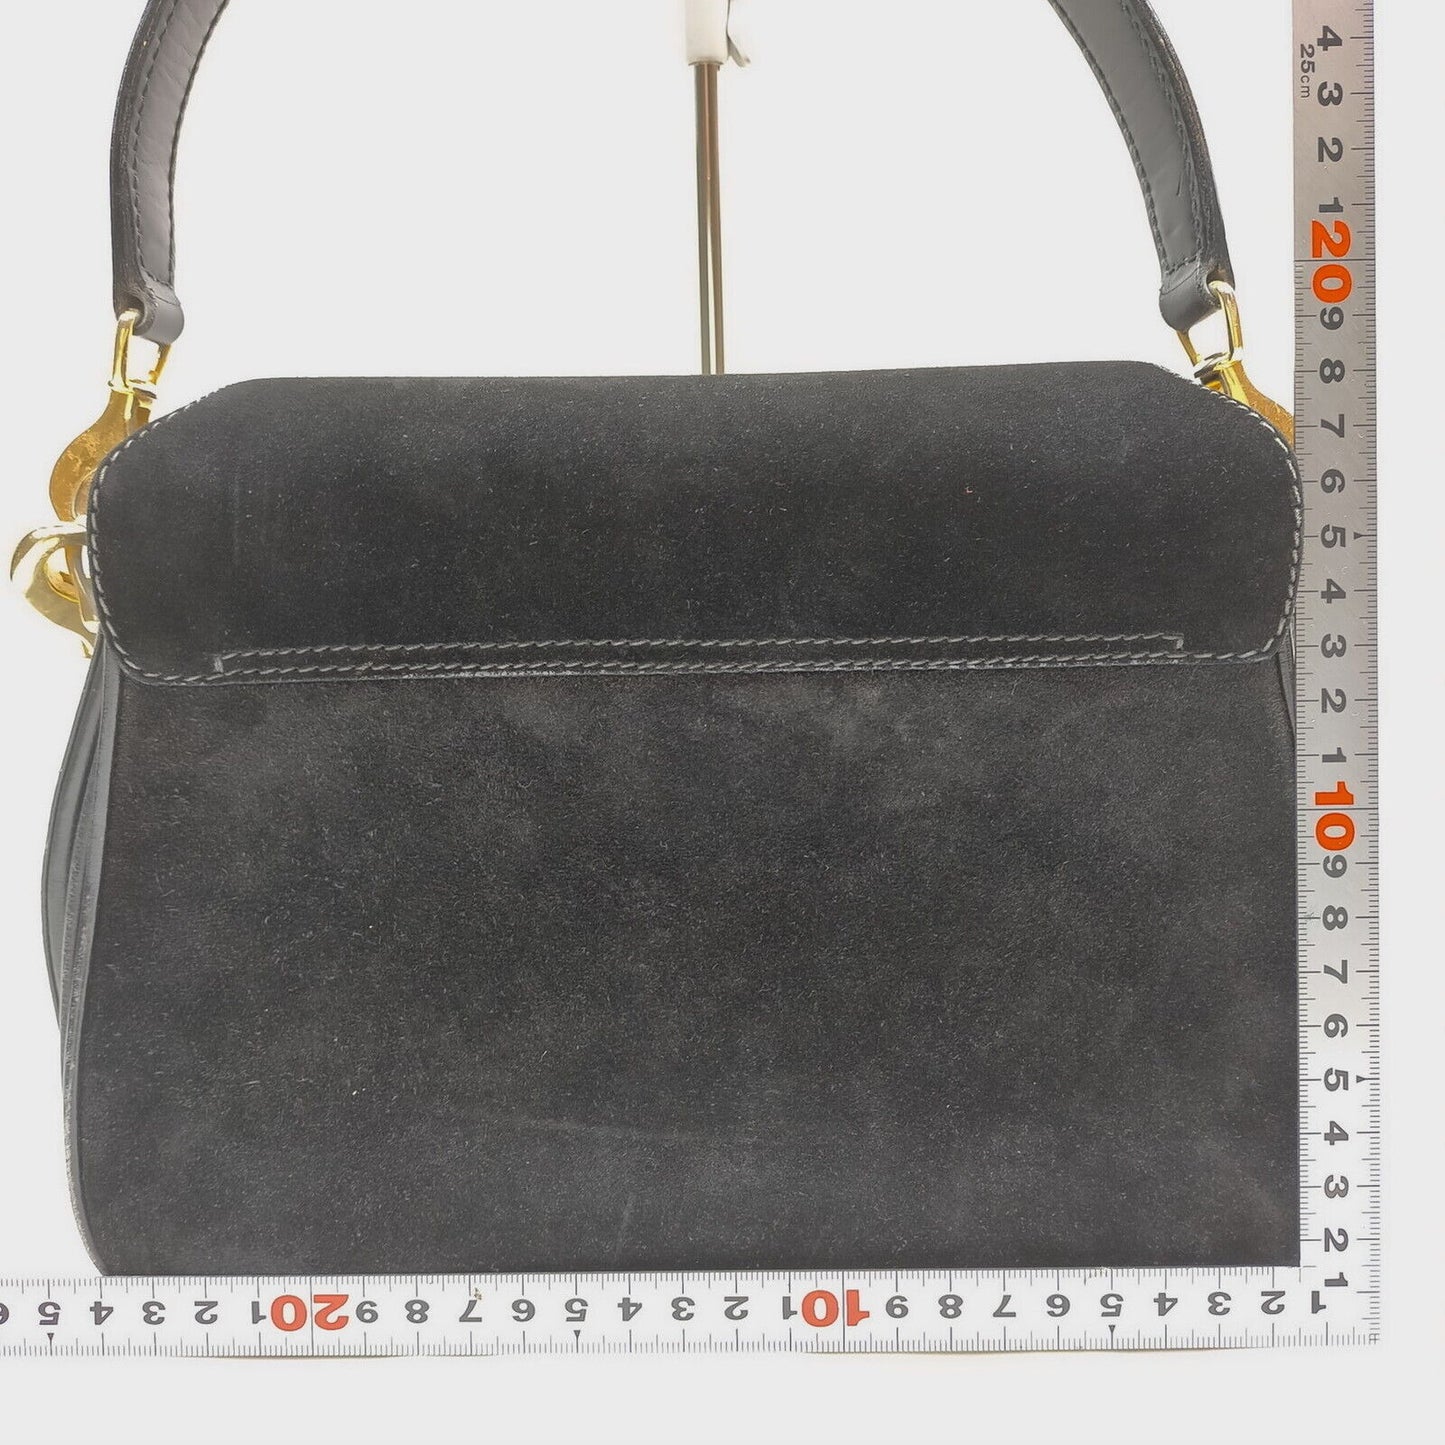 Gucci black leather and suede 1947 Bamboo two-way purse